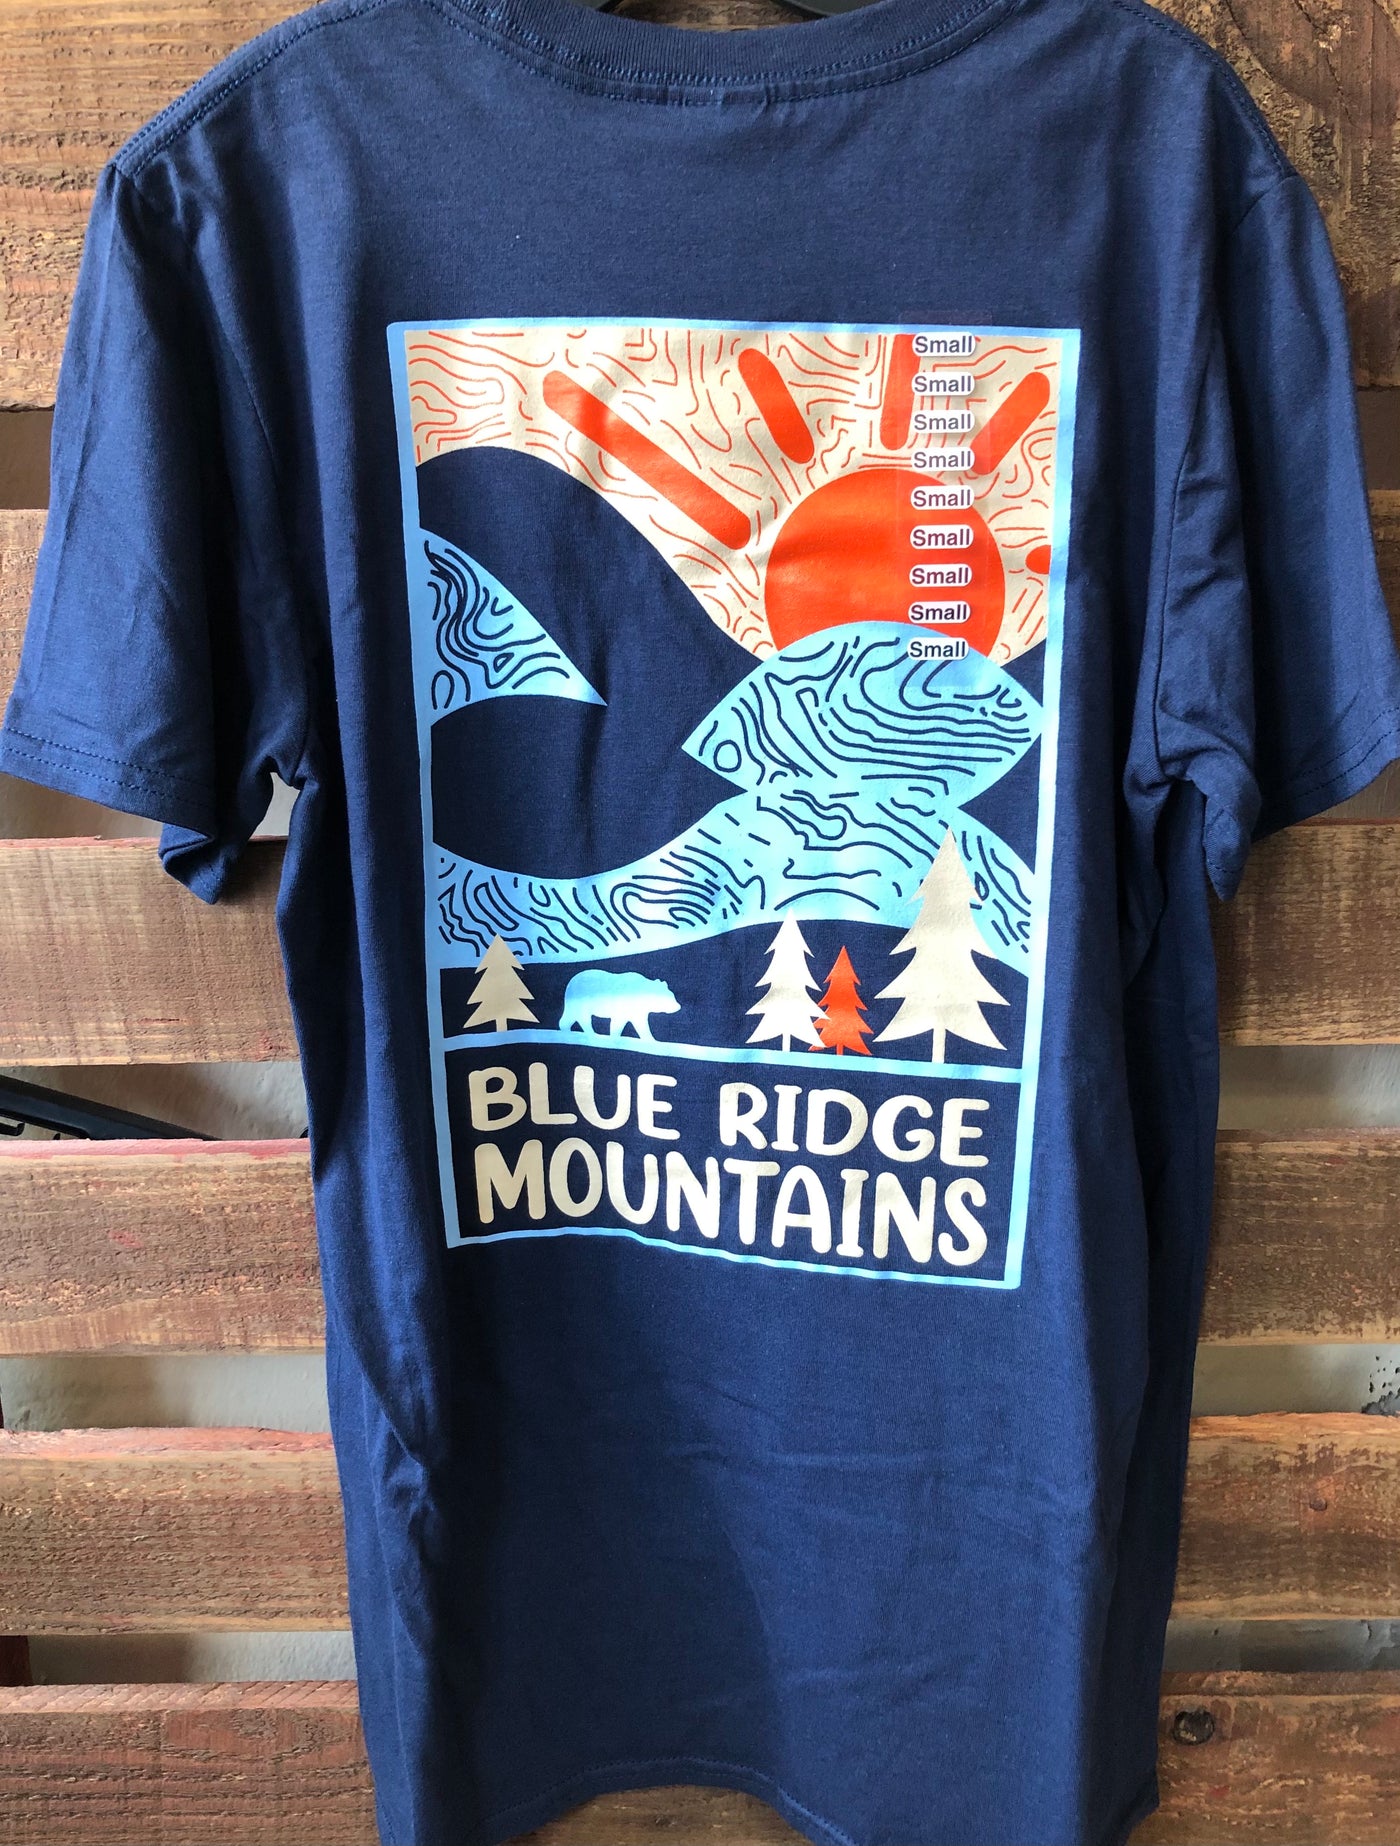 The Old North State - Blue Ridge Mountains